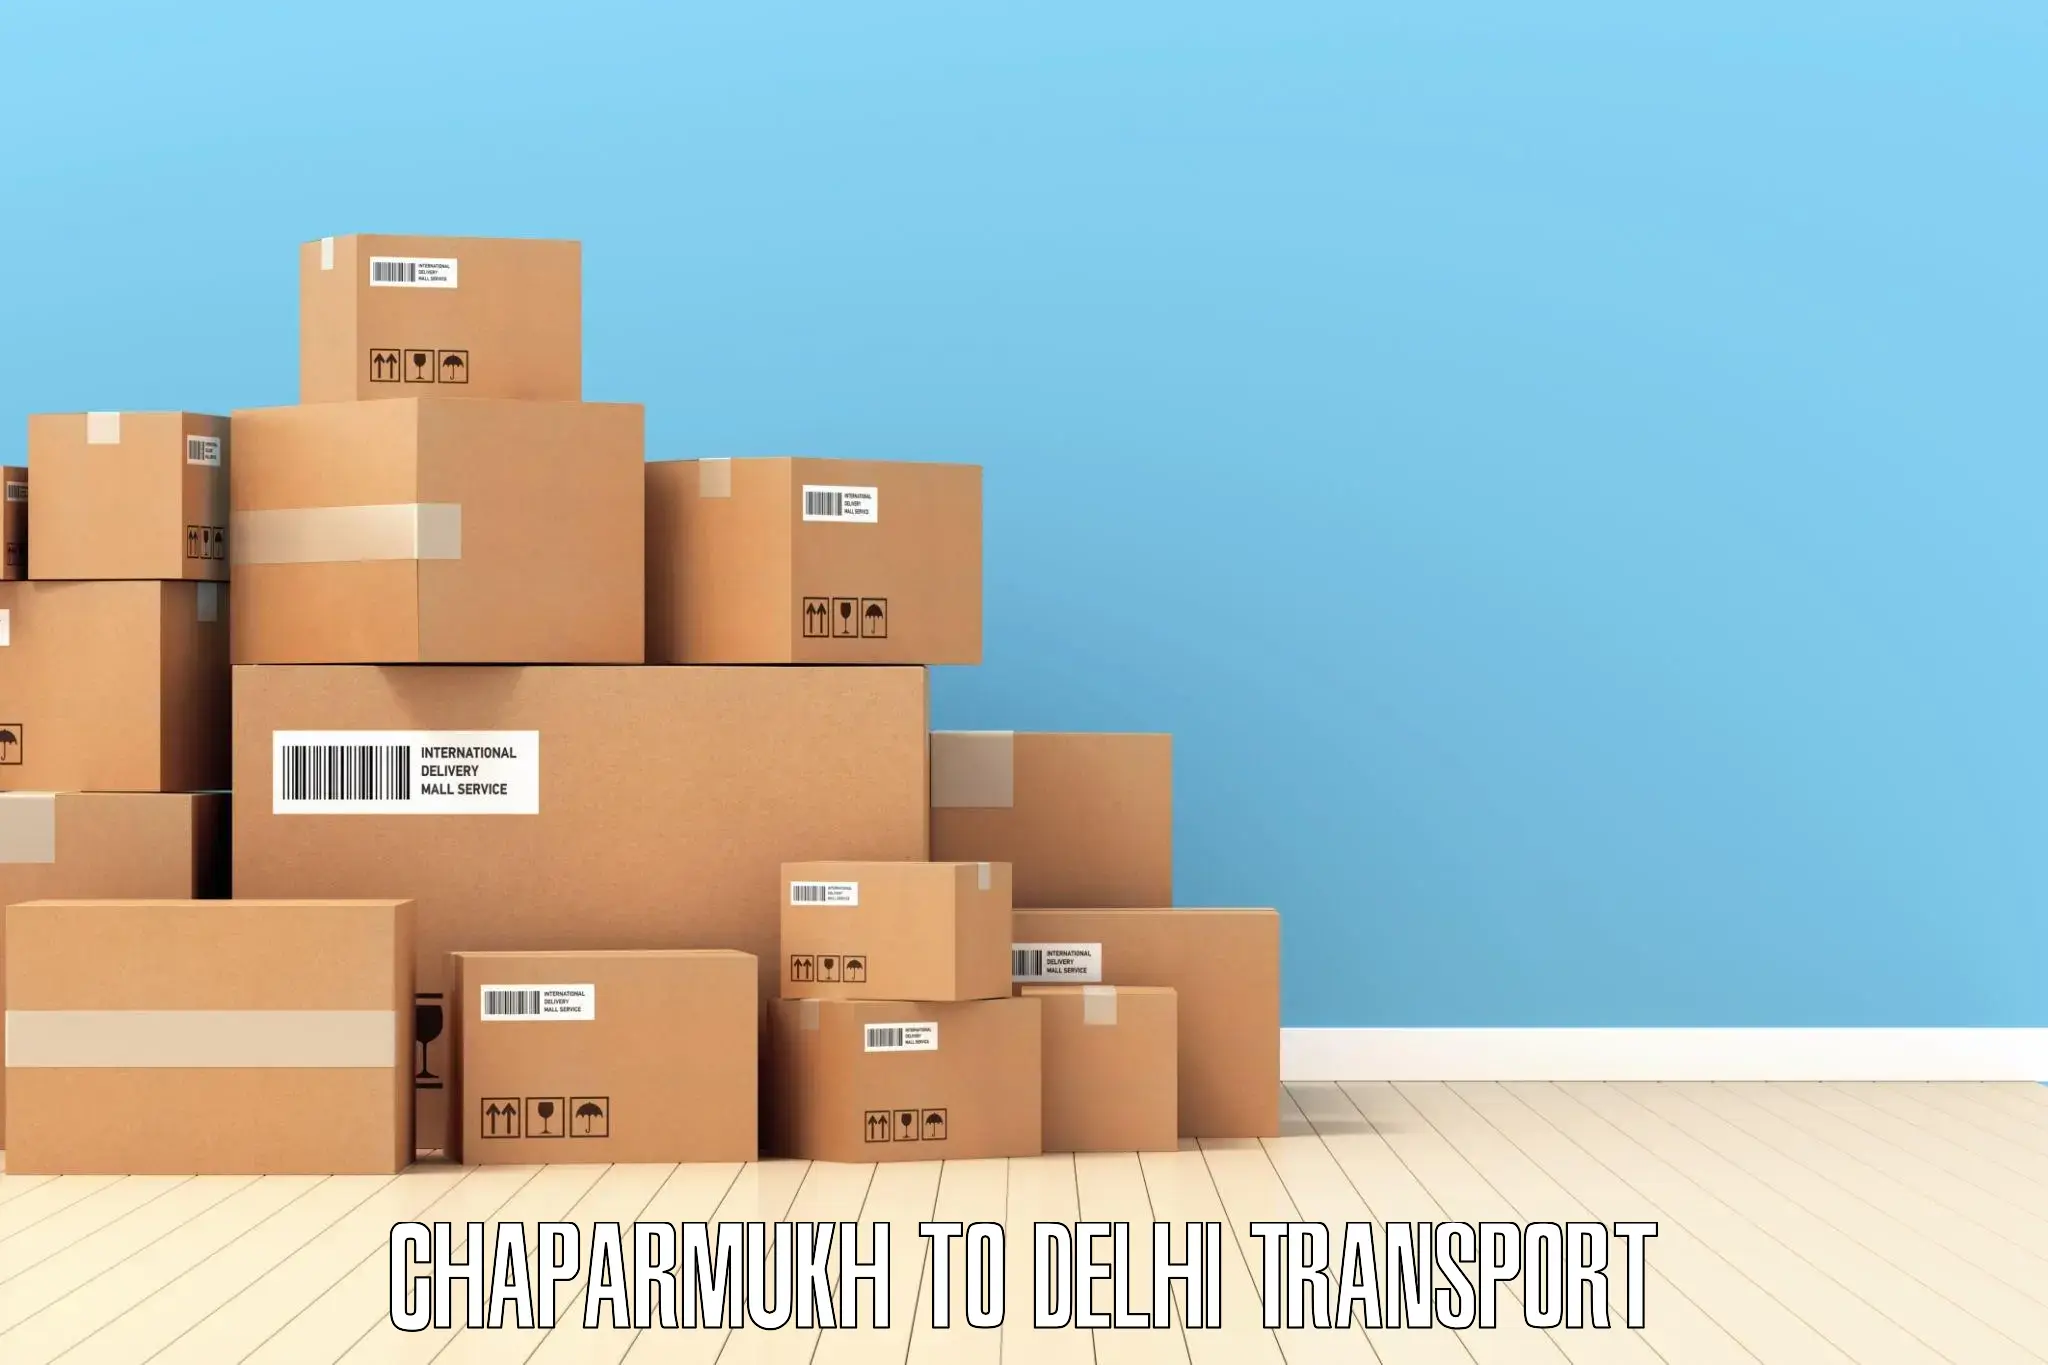 International cargo transportation services Chaparmukh to Lodhi Road